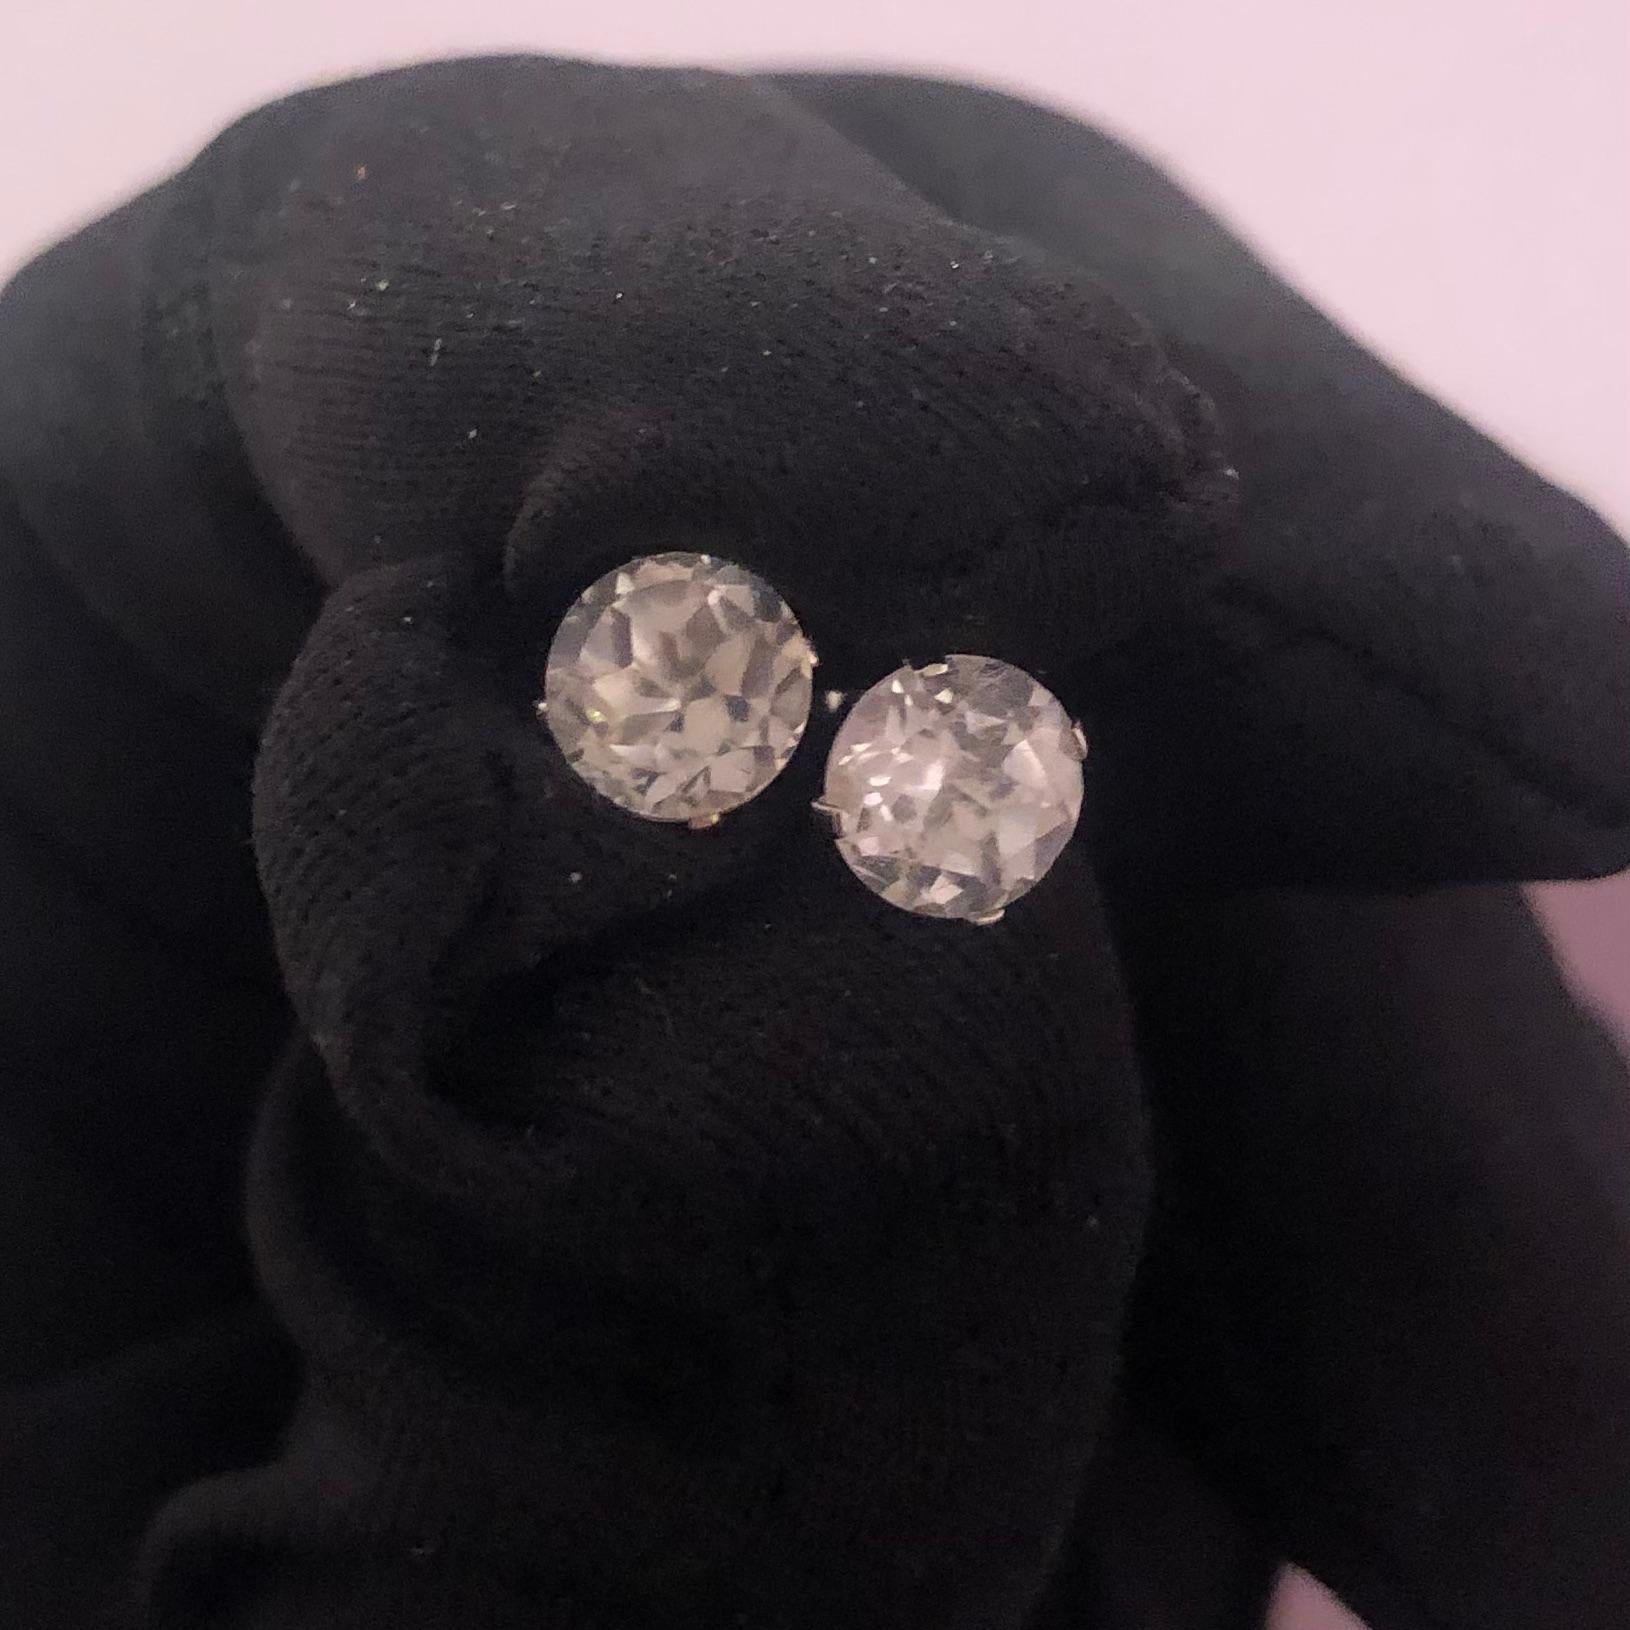 Classic 2 Carat solitaire white topaz stud earrings in 925 silver. Pair of natural earth-mined white topaz stud earrings weighing approx. 2.00 carats are prong-set in these 925 silver basket studs.

White topaz stud earrings come with a fine velvet